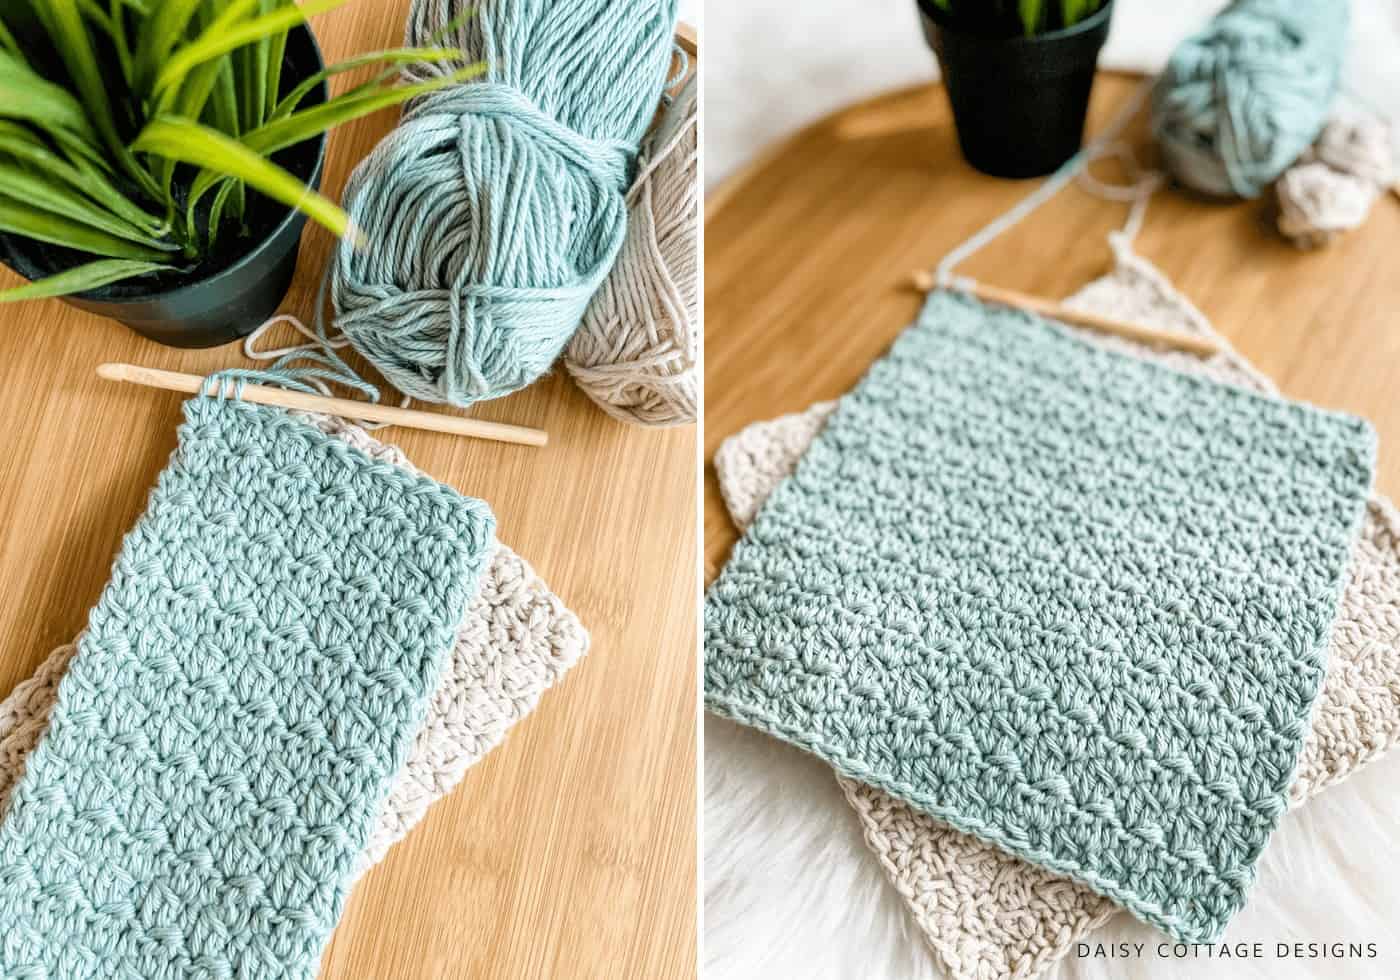 How to Crochet a Dishcloth 2022 - Daisy Cottage Designs